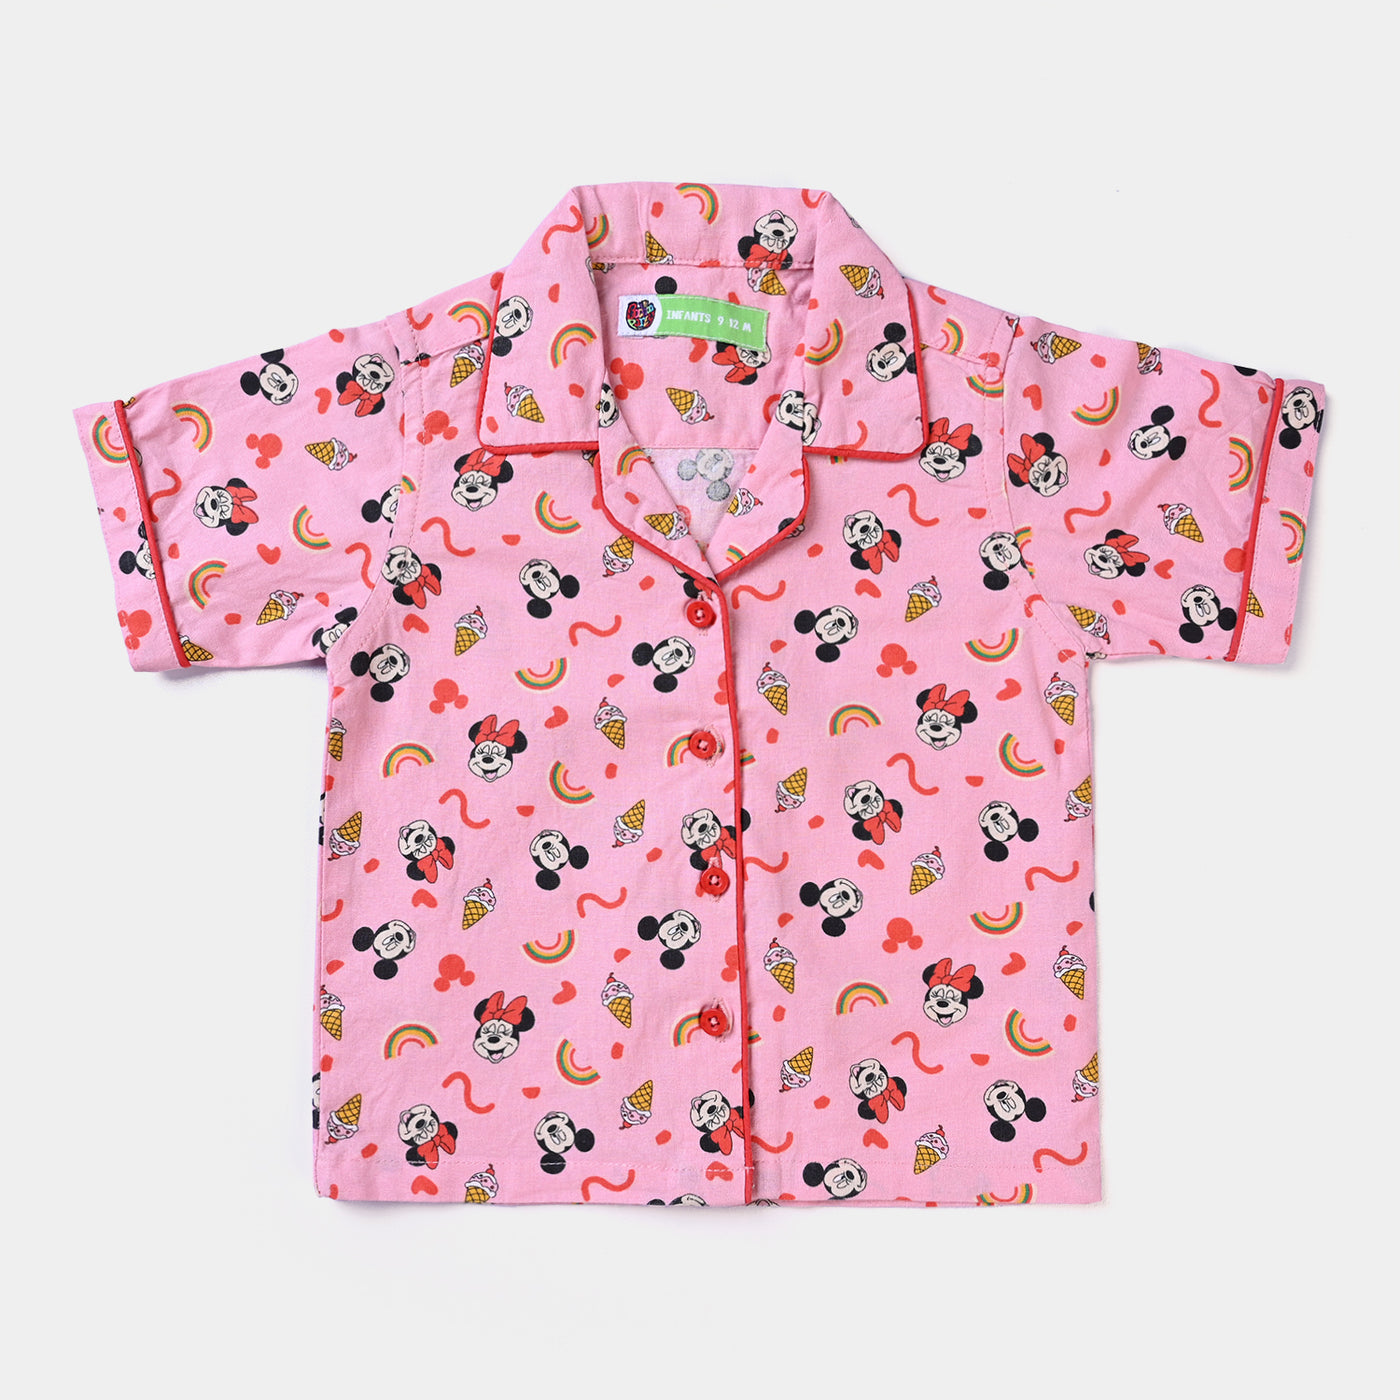 Infant Girls Cotton Woven Night Suit Character-Pink